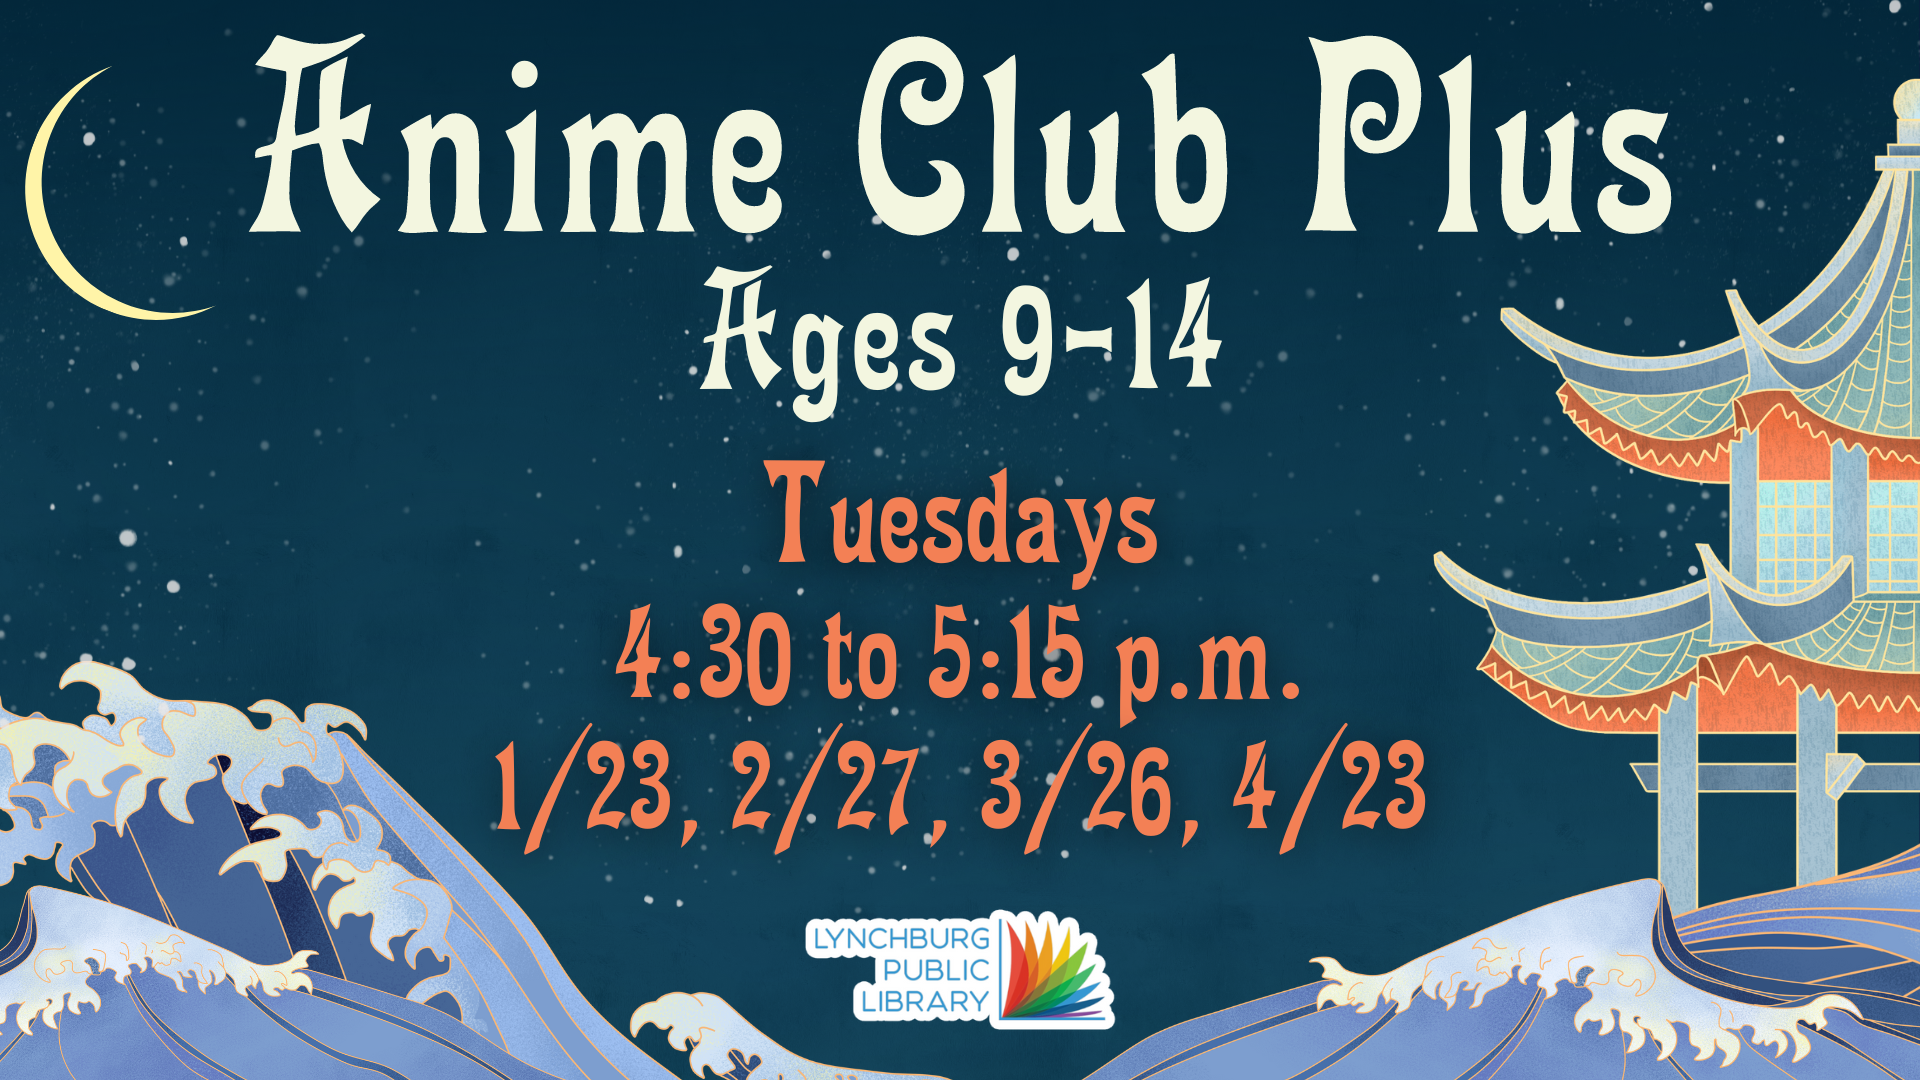 Image of a fantasy-themed background with a night sky, crashing waves, and a Japanese-inspired building alongside information about LPL's Spring 2024 Anime Club Plus (Ages 9-14) program